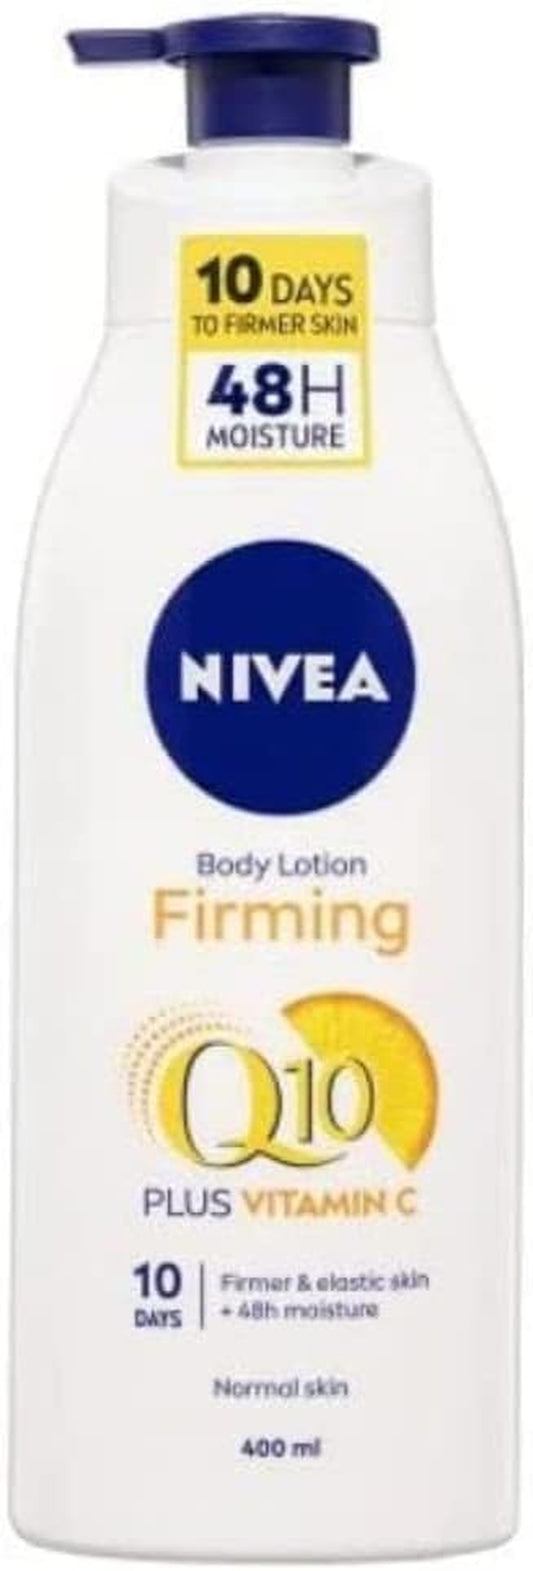 Firming Body Lotion Q10 + Vitamin C Pack of 6 (6 X 400Ml), Nourishing Body Lotion with Q10 & Vitamin C,  Soft Moisturising Cream for Firm Skin